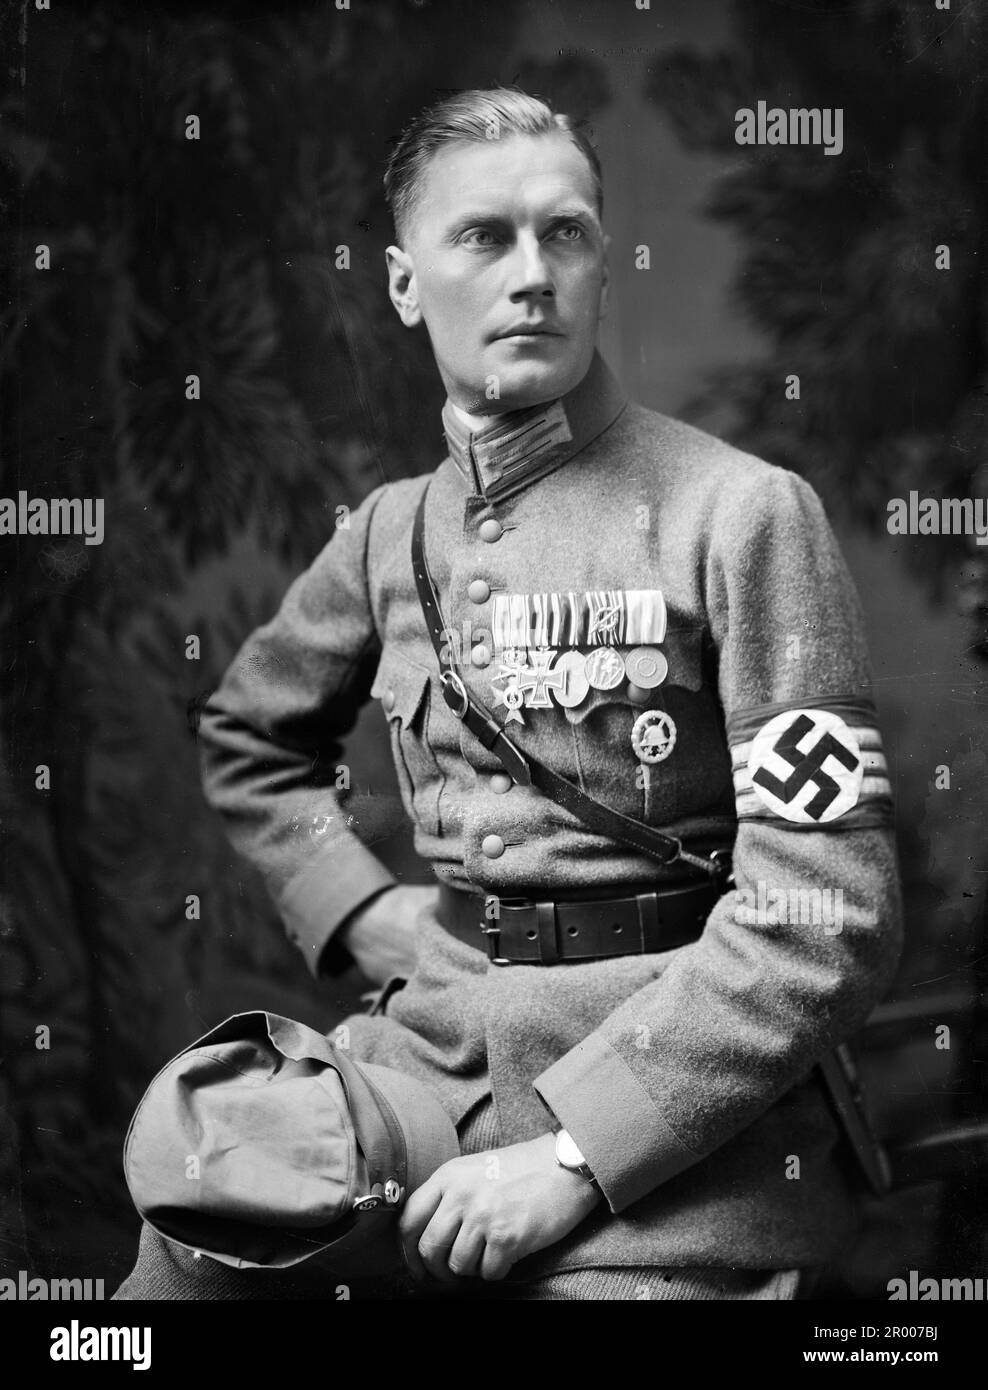 Wilhelm Brückner (11 December 1884 – 18 August 1954) was Adolf Hitler's chief adjutant until October 1940. Thereafter, Brückner joined the army, becoming an Oberst (colonel) by the end of World War II. In late 1922 he joined the Nazi Party . On 9 November 1923 Brückner took part in the Beer Hall Putsch in Munich, and was found guilty of aiding and abetting high treason. Brückner was appointed Chief Adjutant to Hitler on 20 February 1934, and retained that role until being dismissed on 18 October 1940. Here he is wearing his nazi uniform with nazi swastika armband, military decorations, shoulde Stock Photo